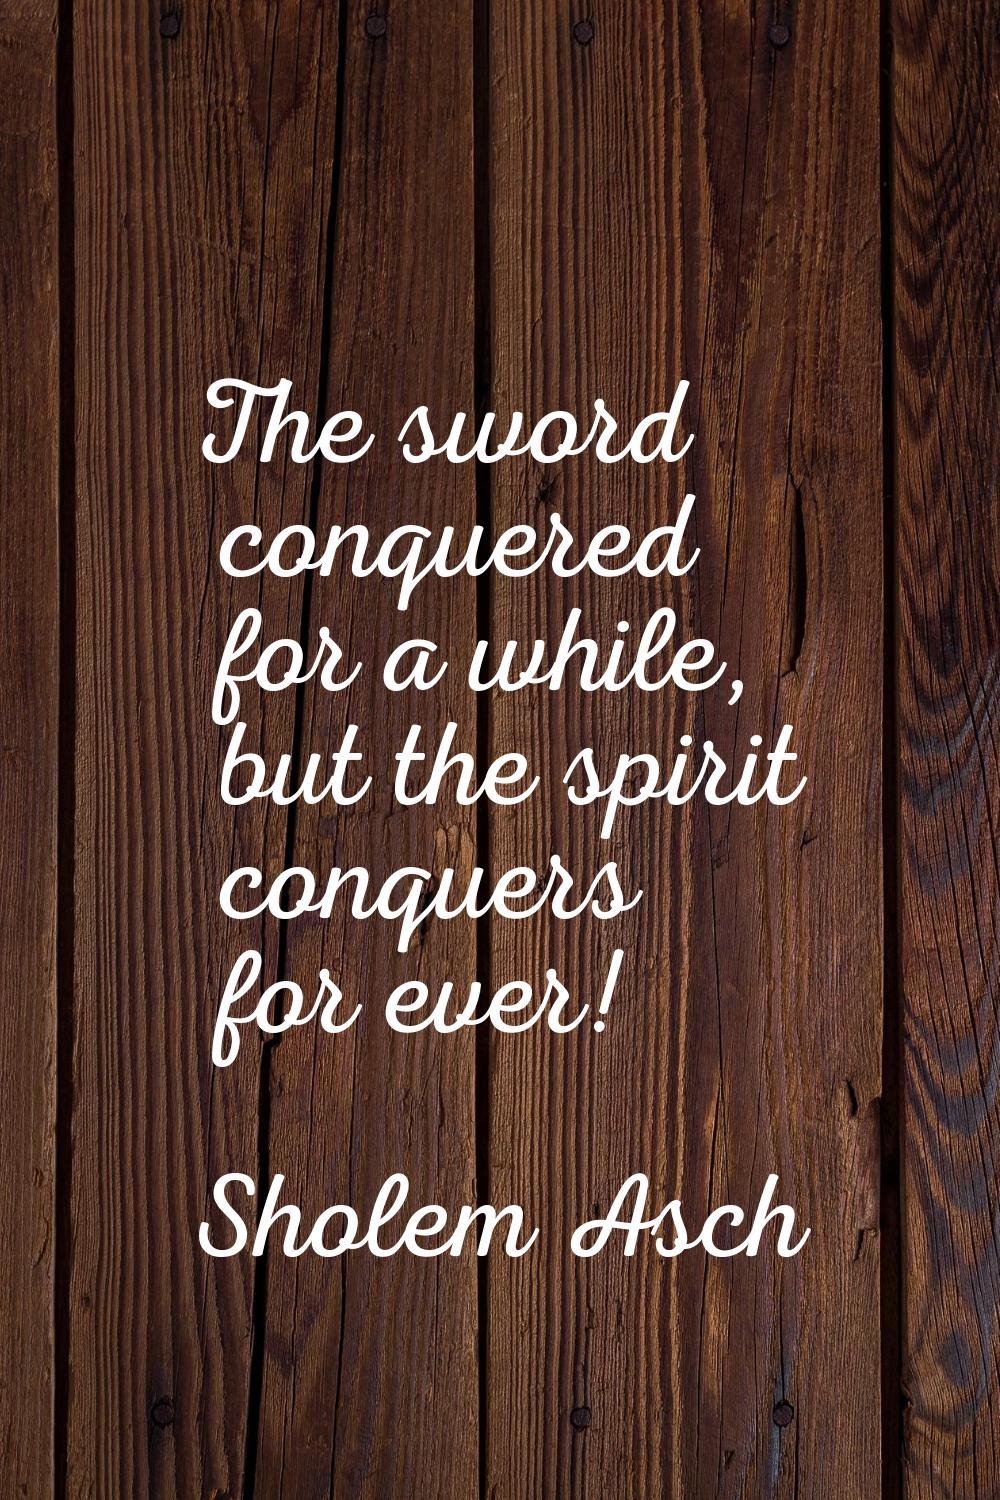 The sword conquered for a while, but the spirit conquers for ever!